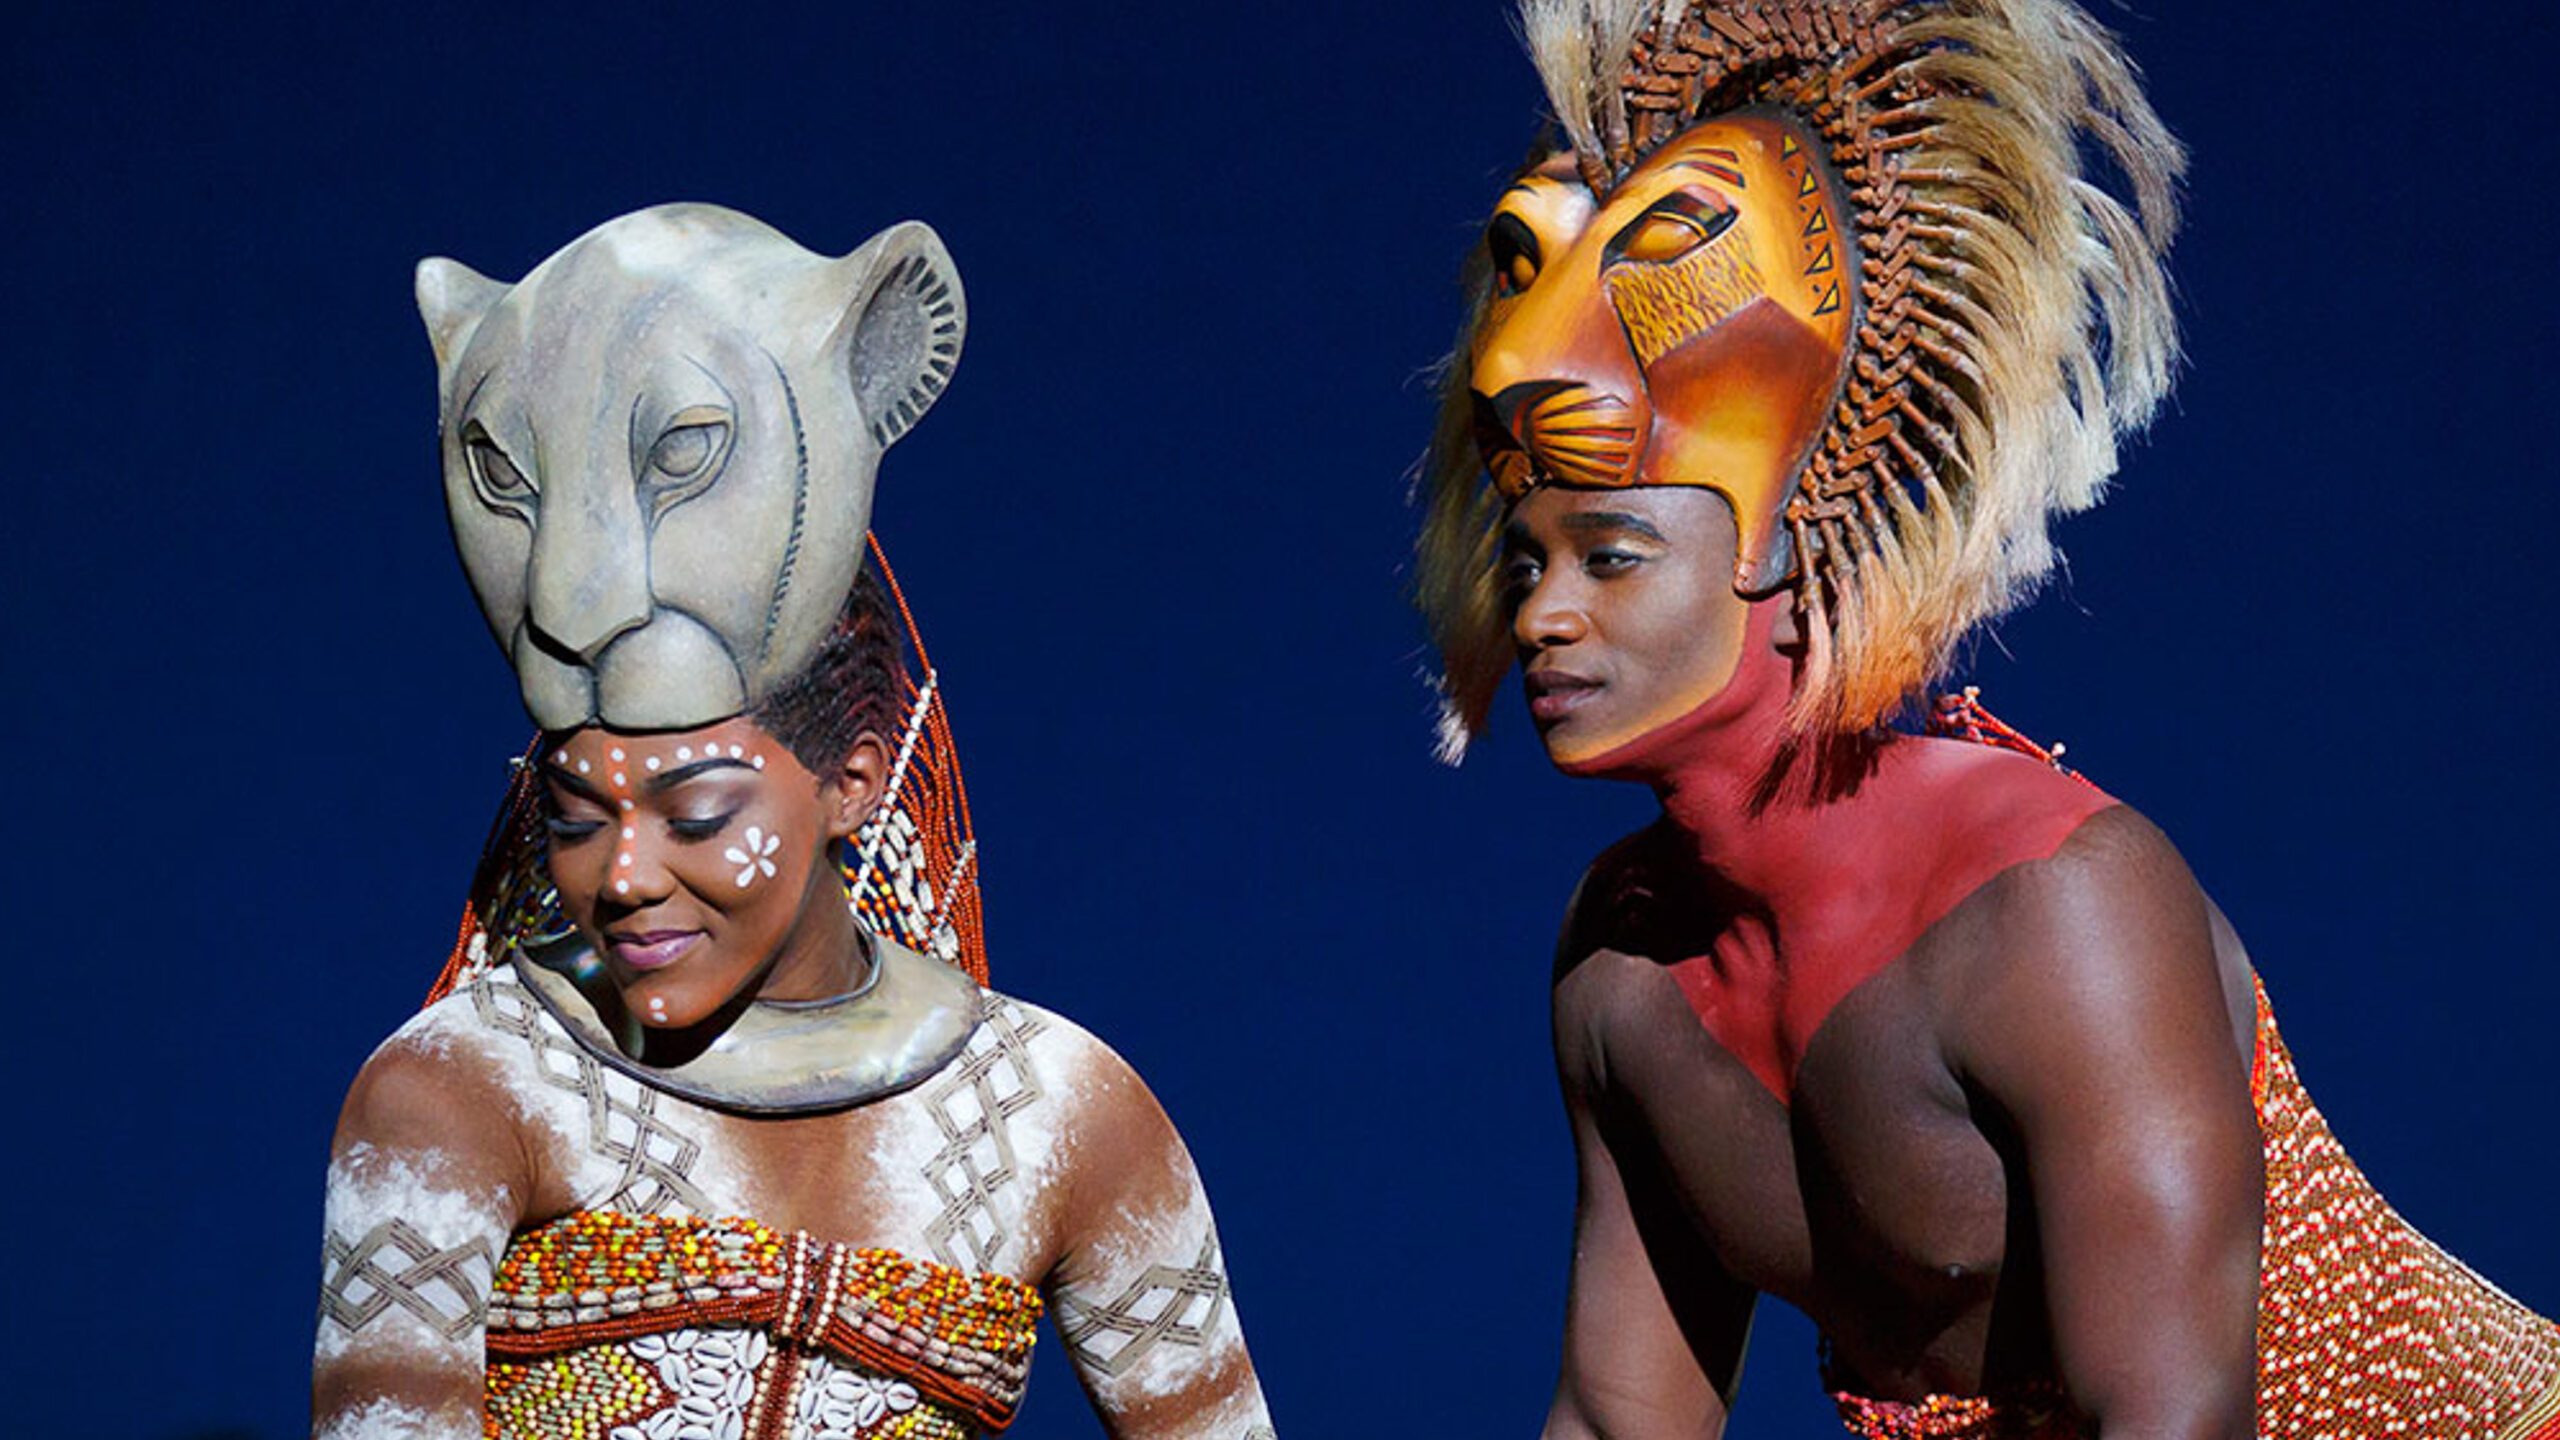 Disney’s ‘The Lion King’ is coming to Manila